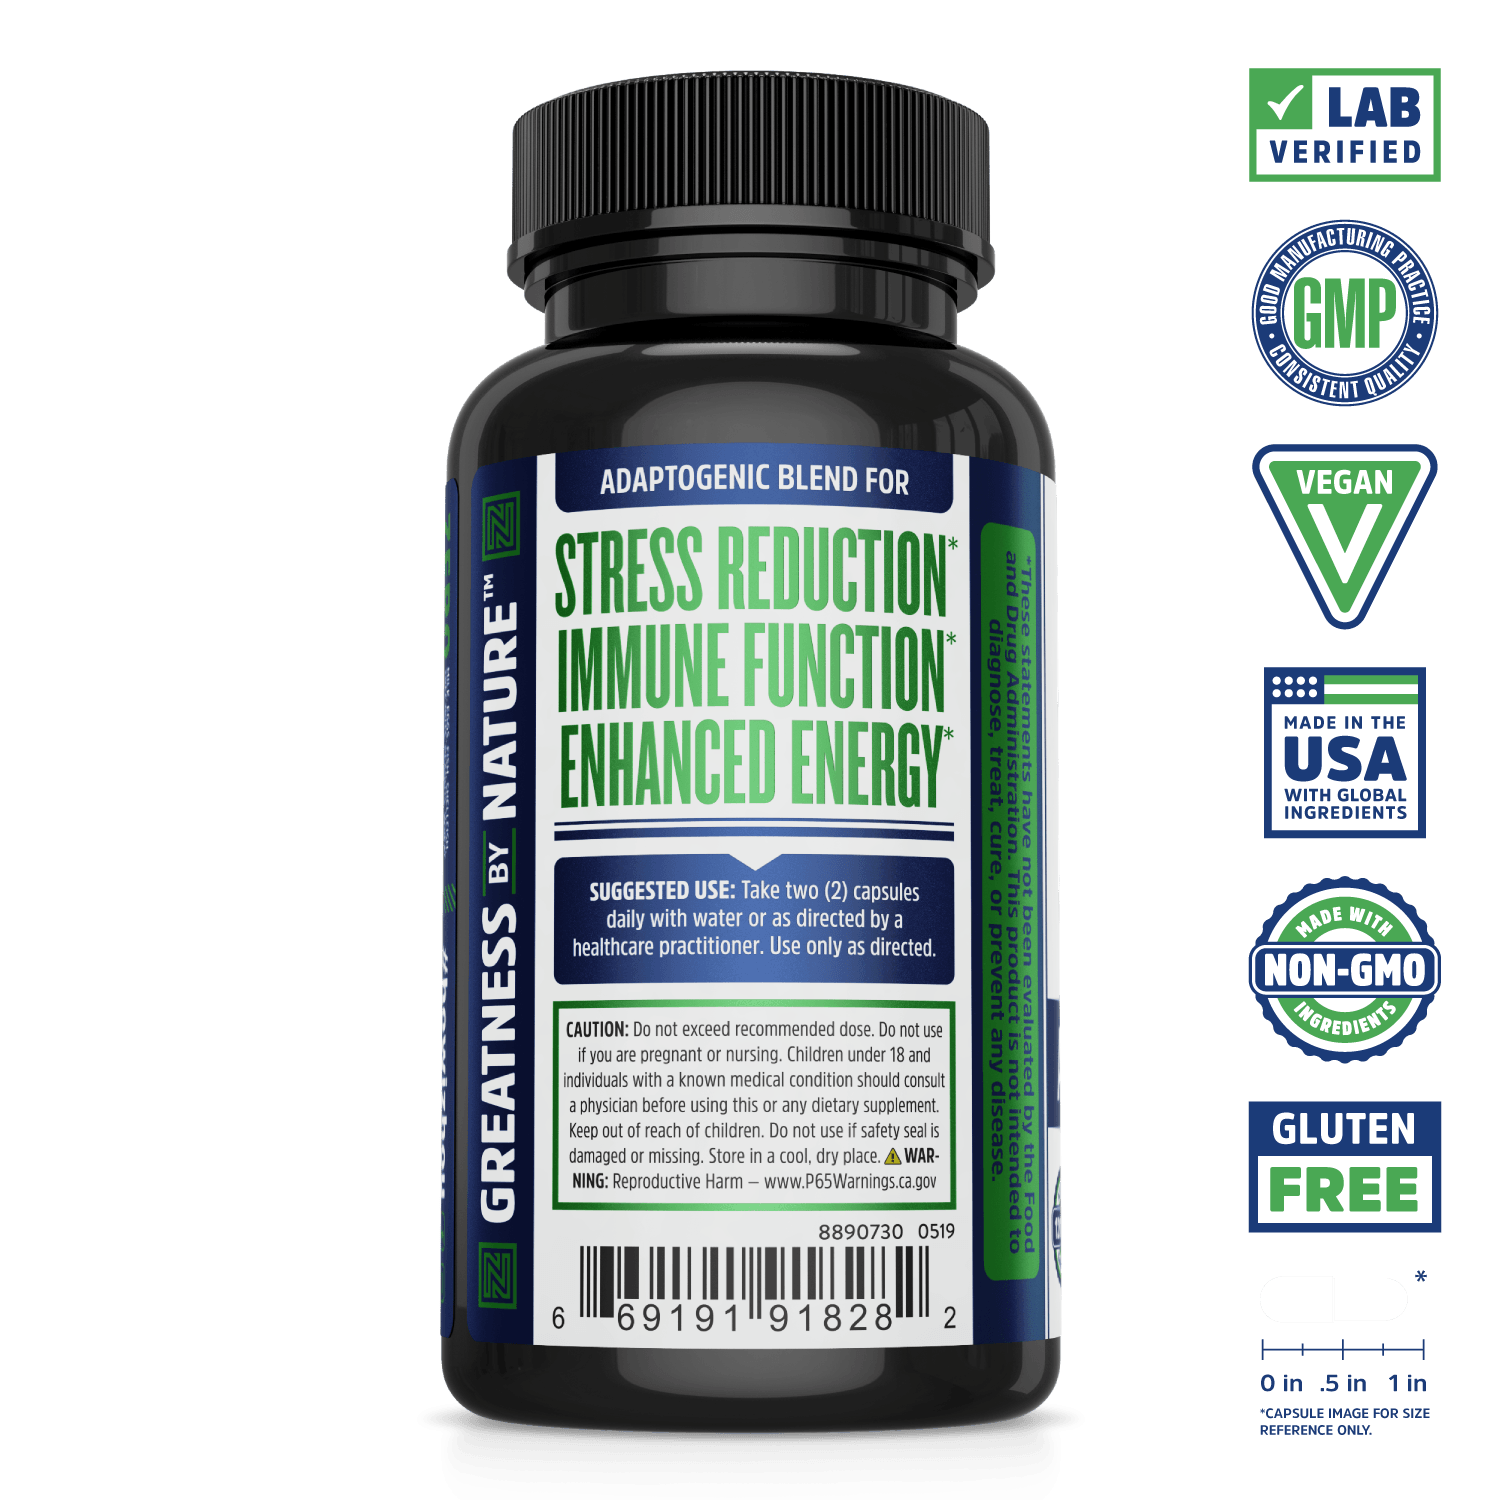 Zhou Nutrition Ashwagandha Supplement. Lab verified, good manufacturing practices, vegan, made with non-GMO ingredients, made in the USA with global ingredients, gluten free.